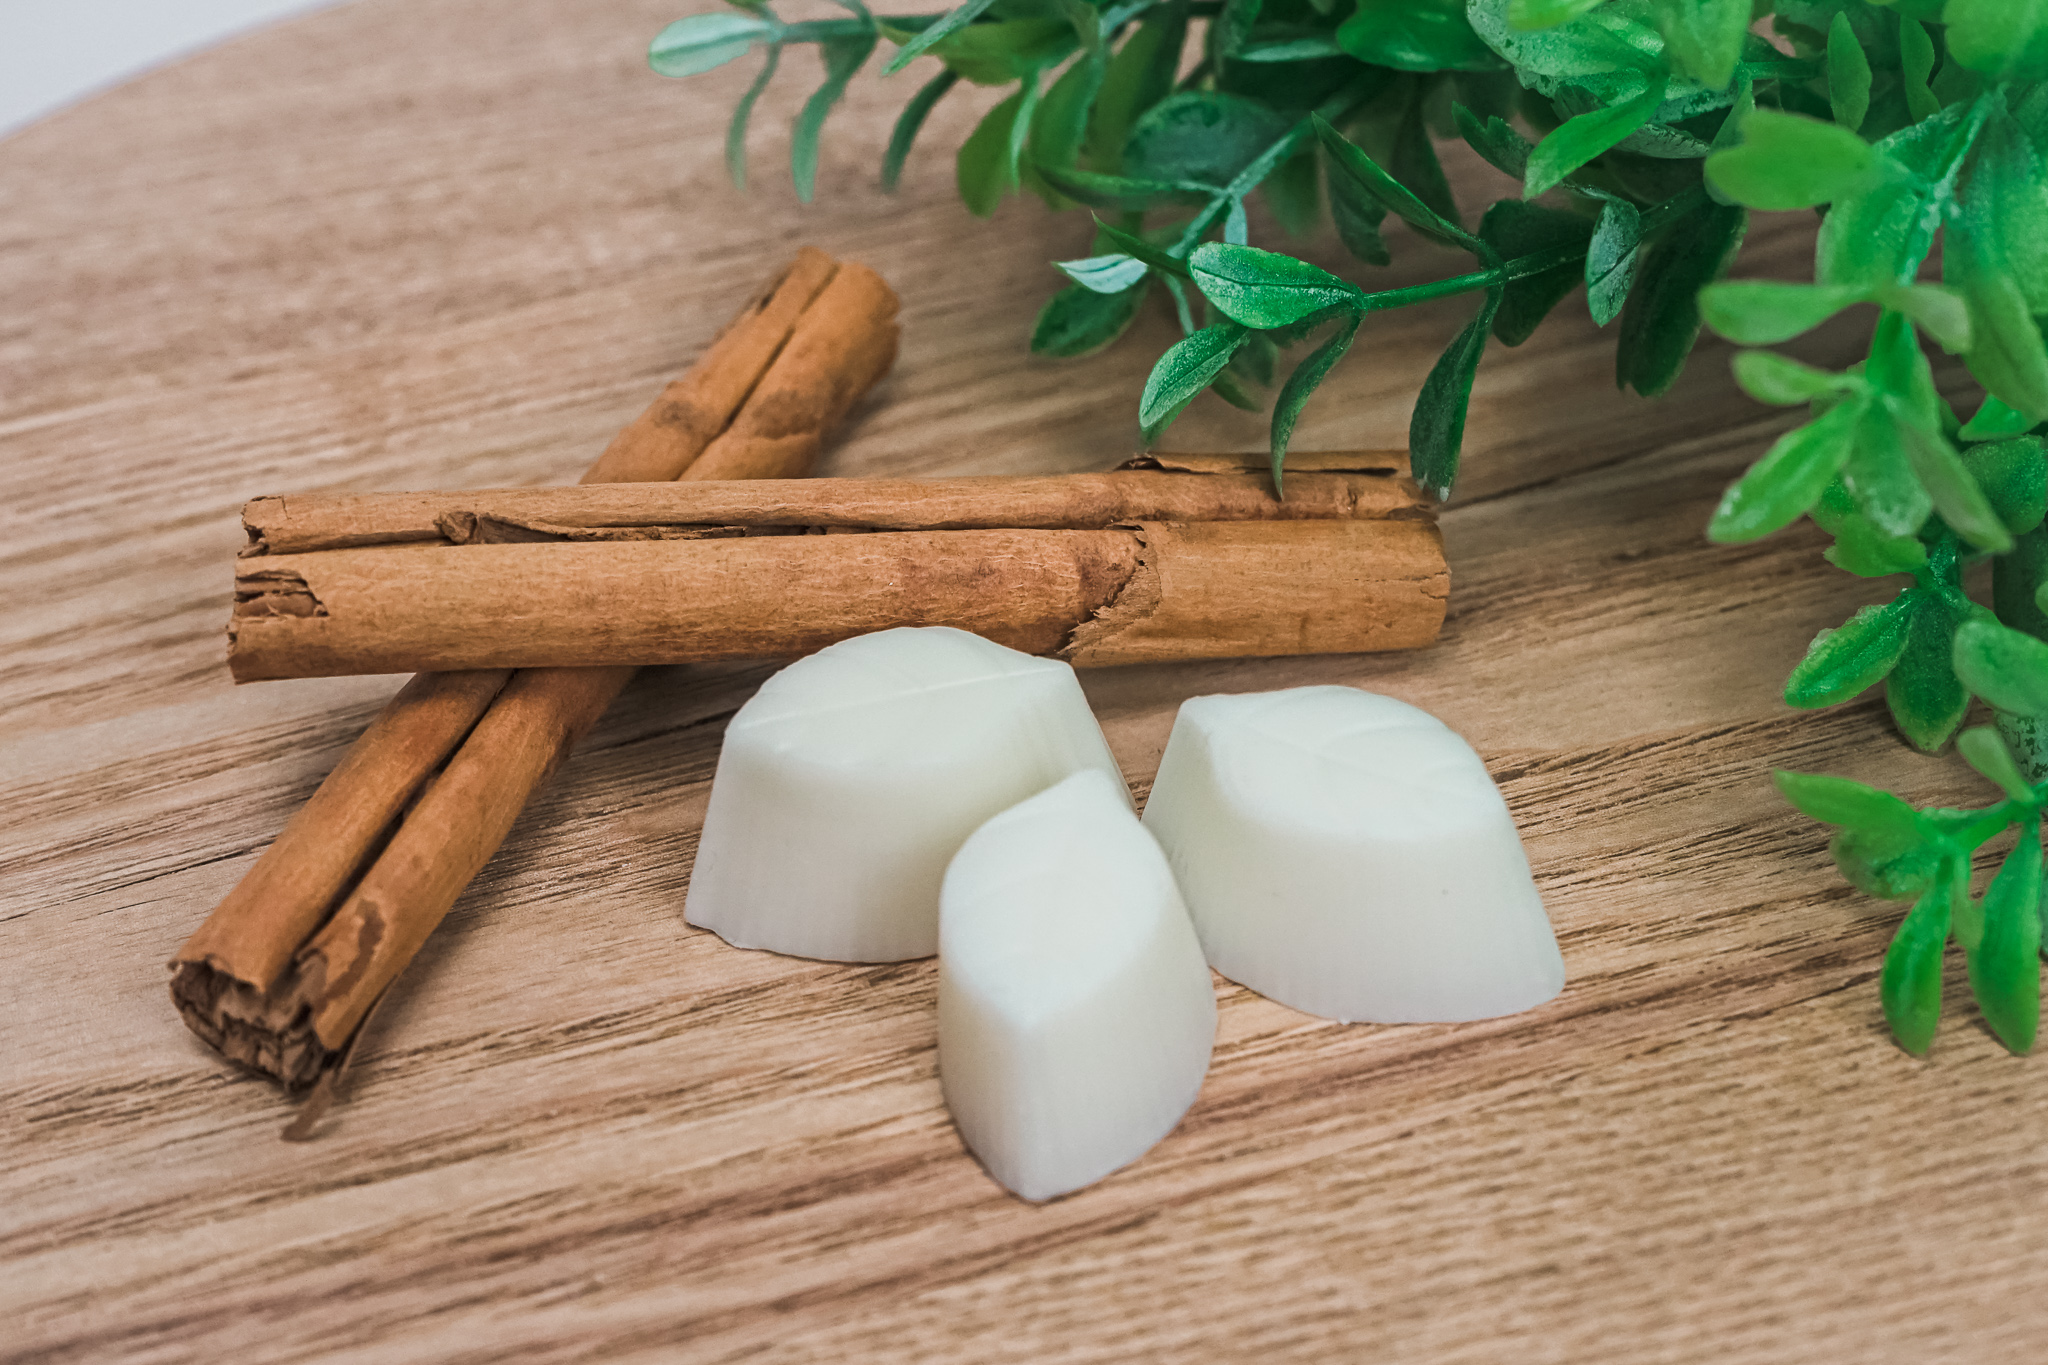 11 Healthy And Eco-Friendly DIY Scented Wax Melts - Shelterness